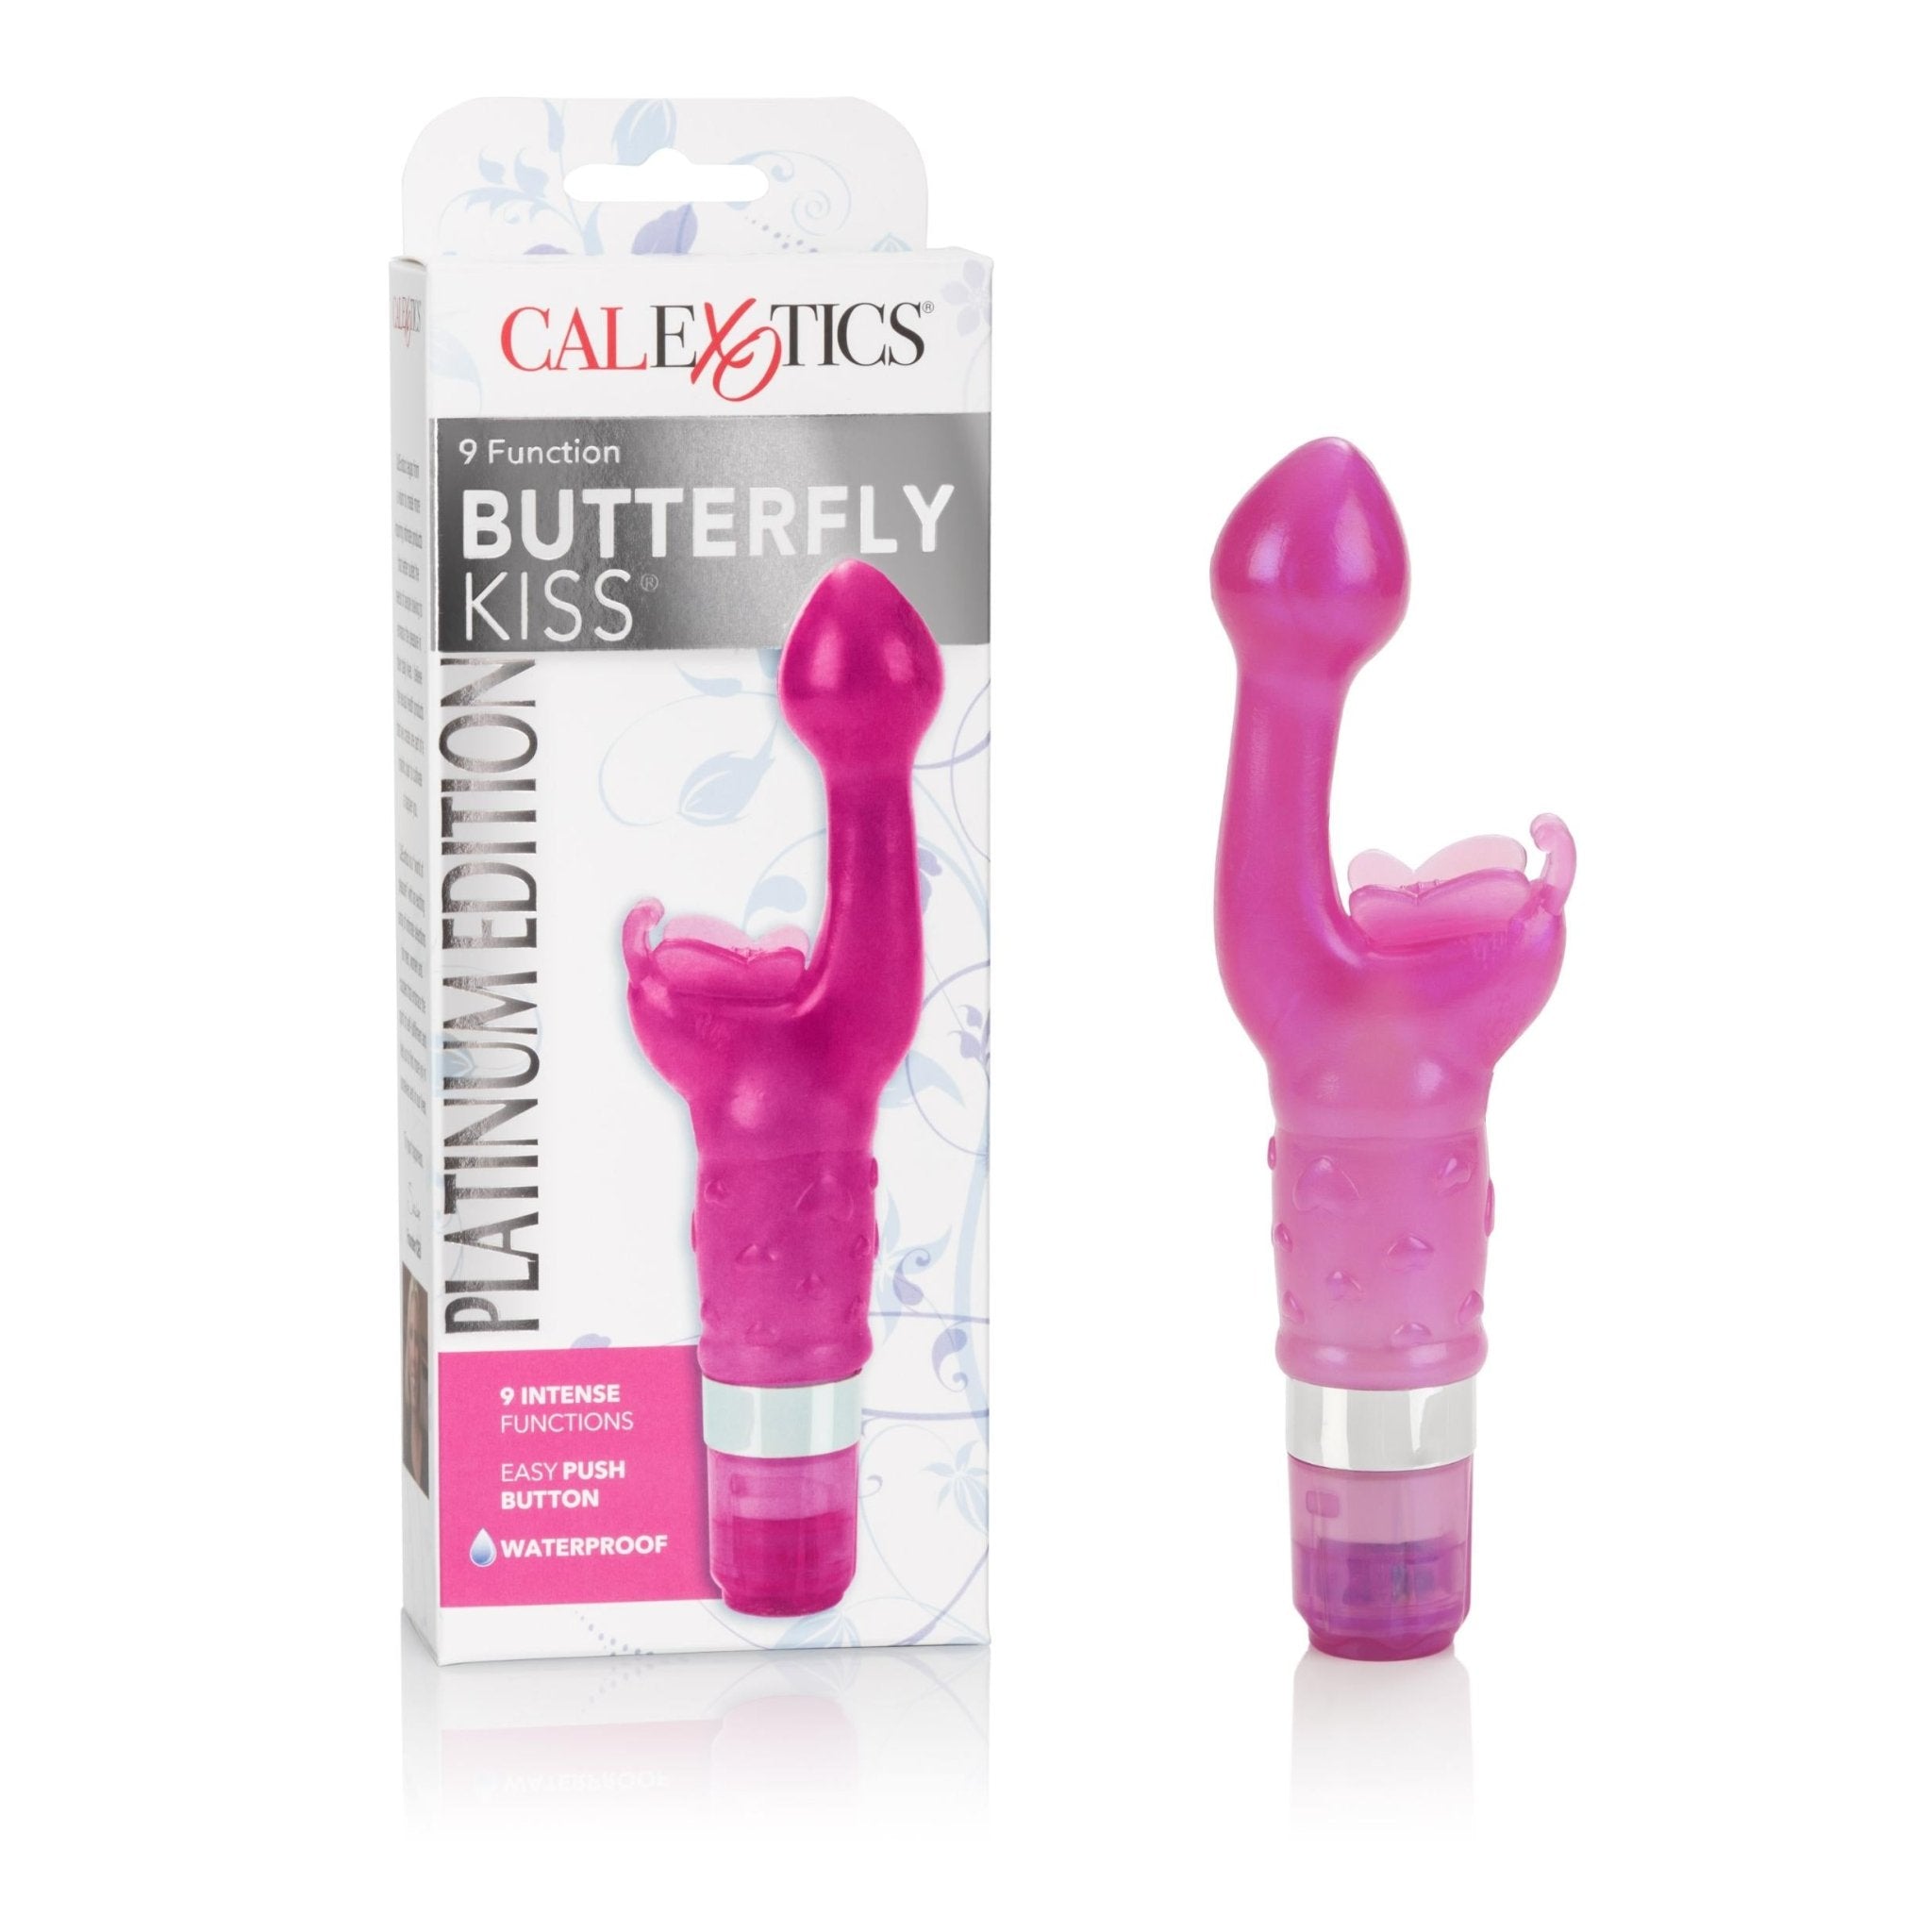 9 Function Butterfly Kiss Vibrator - Platinum Edition